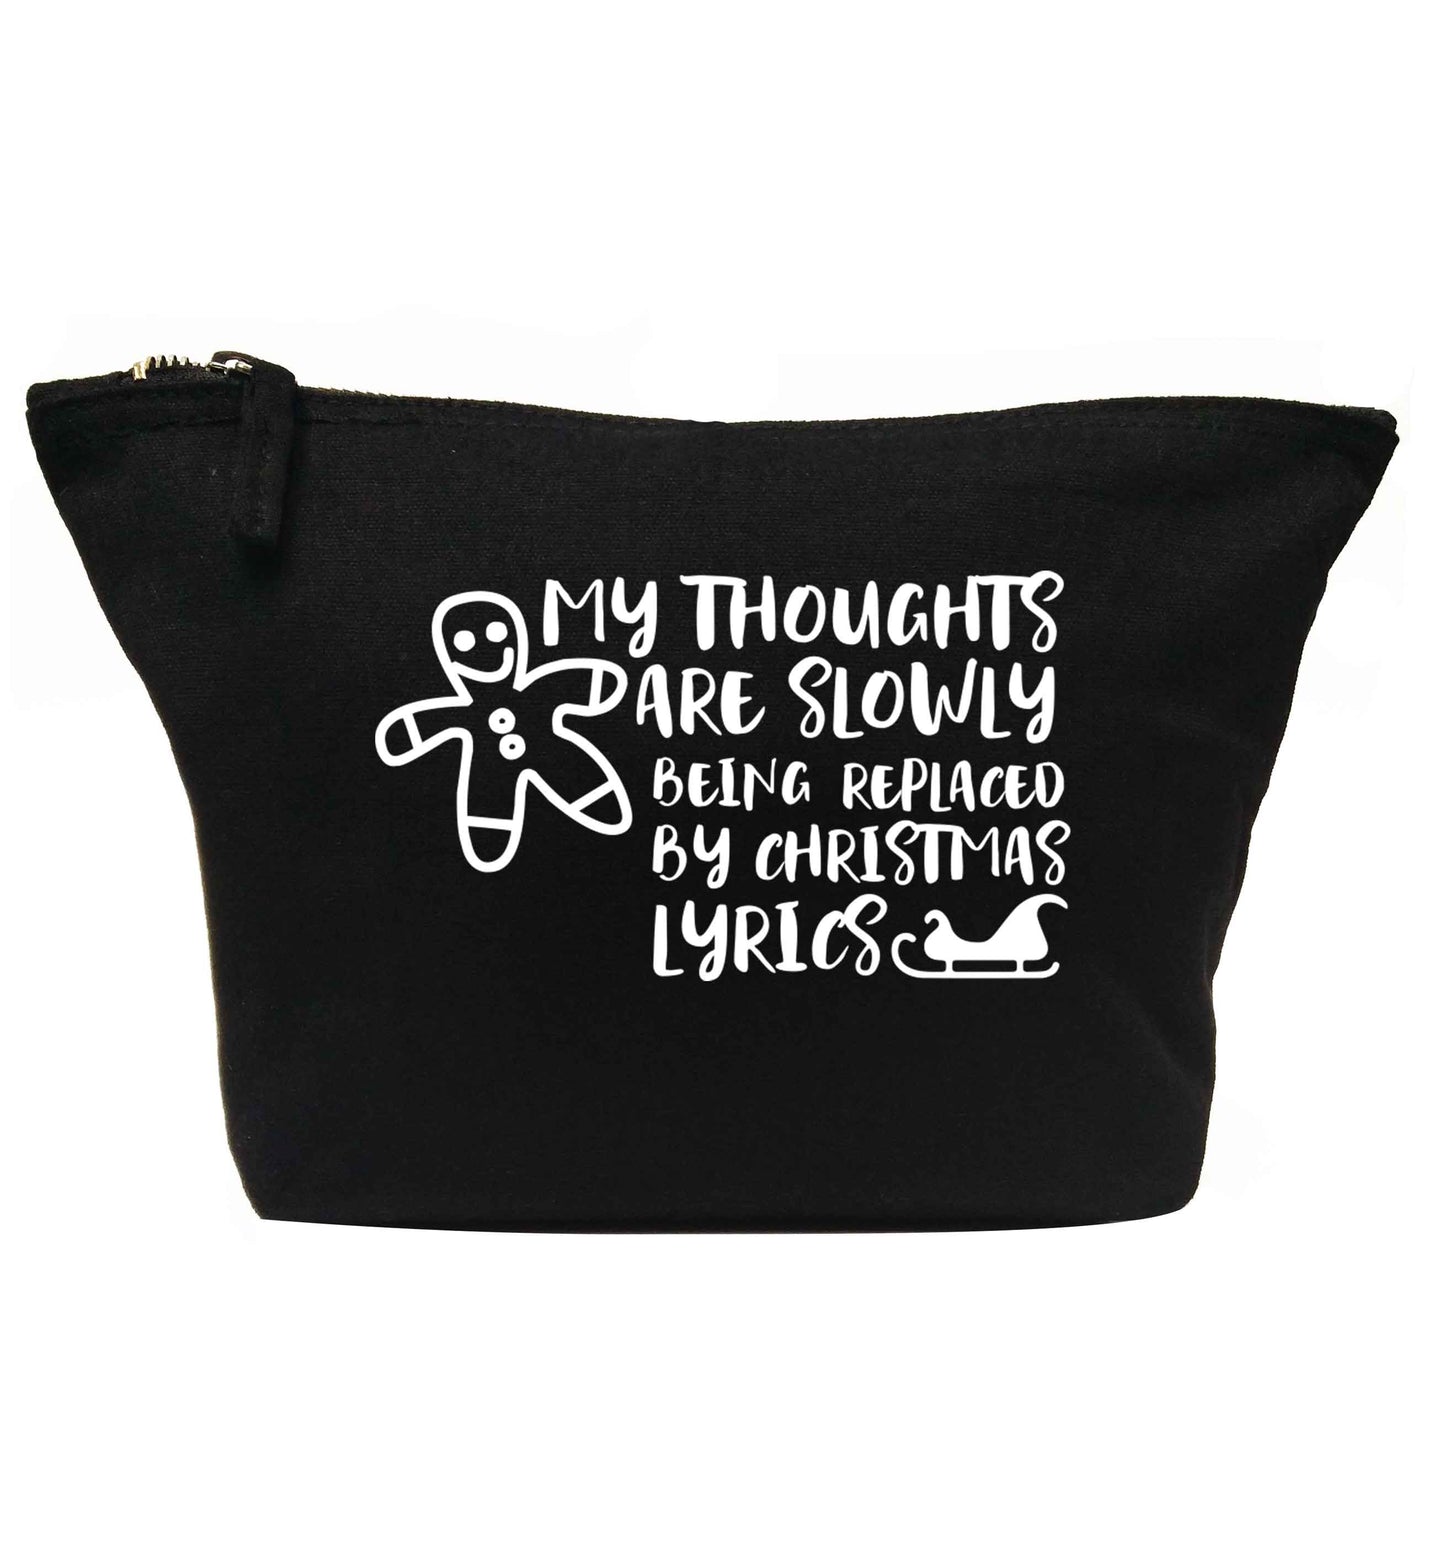 My thoughts are slowly being replaced by Christmas lyrics | makeup / wash bag